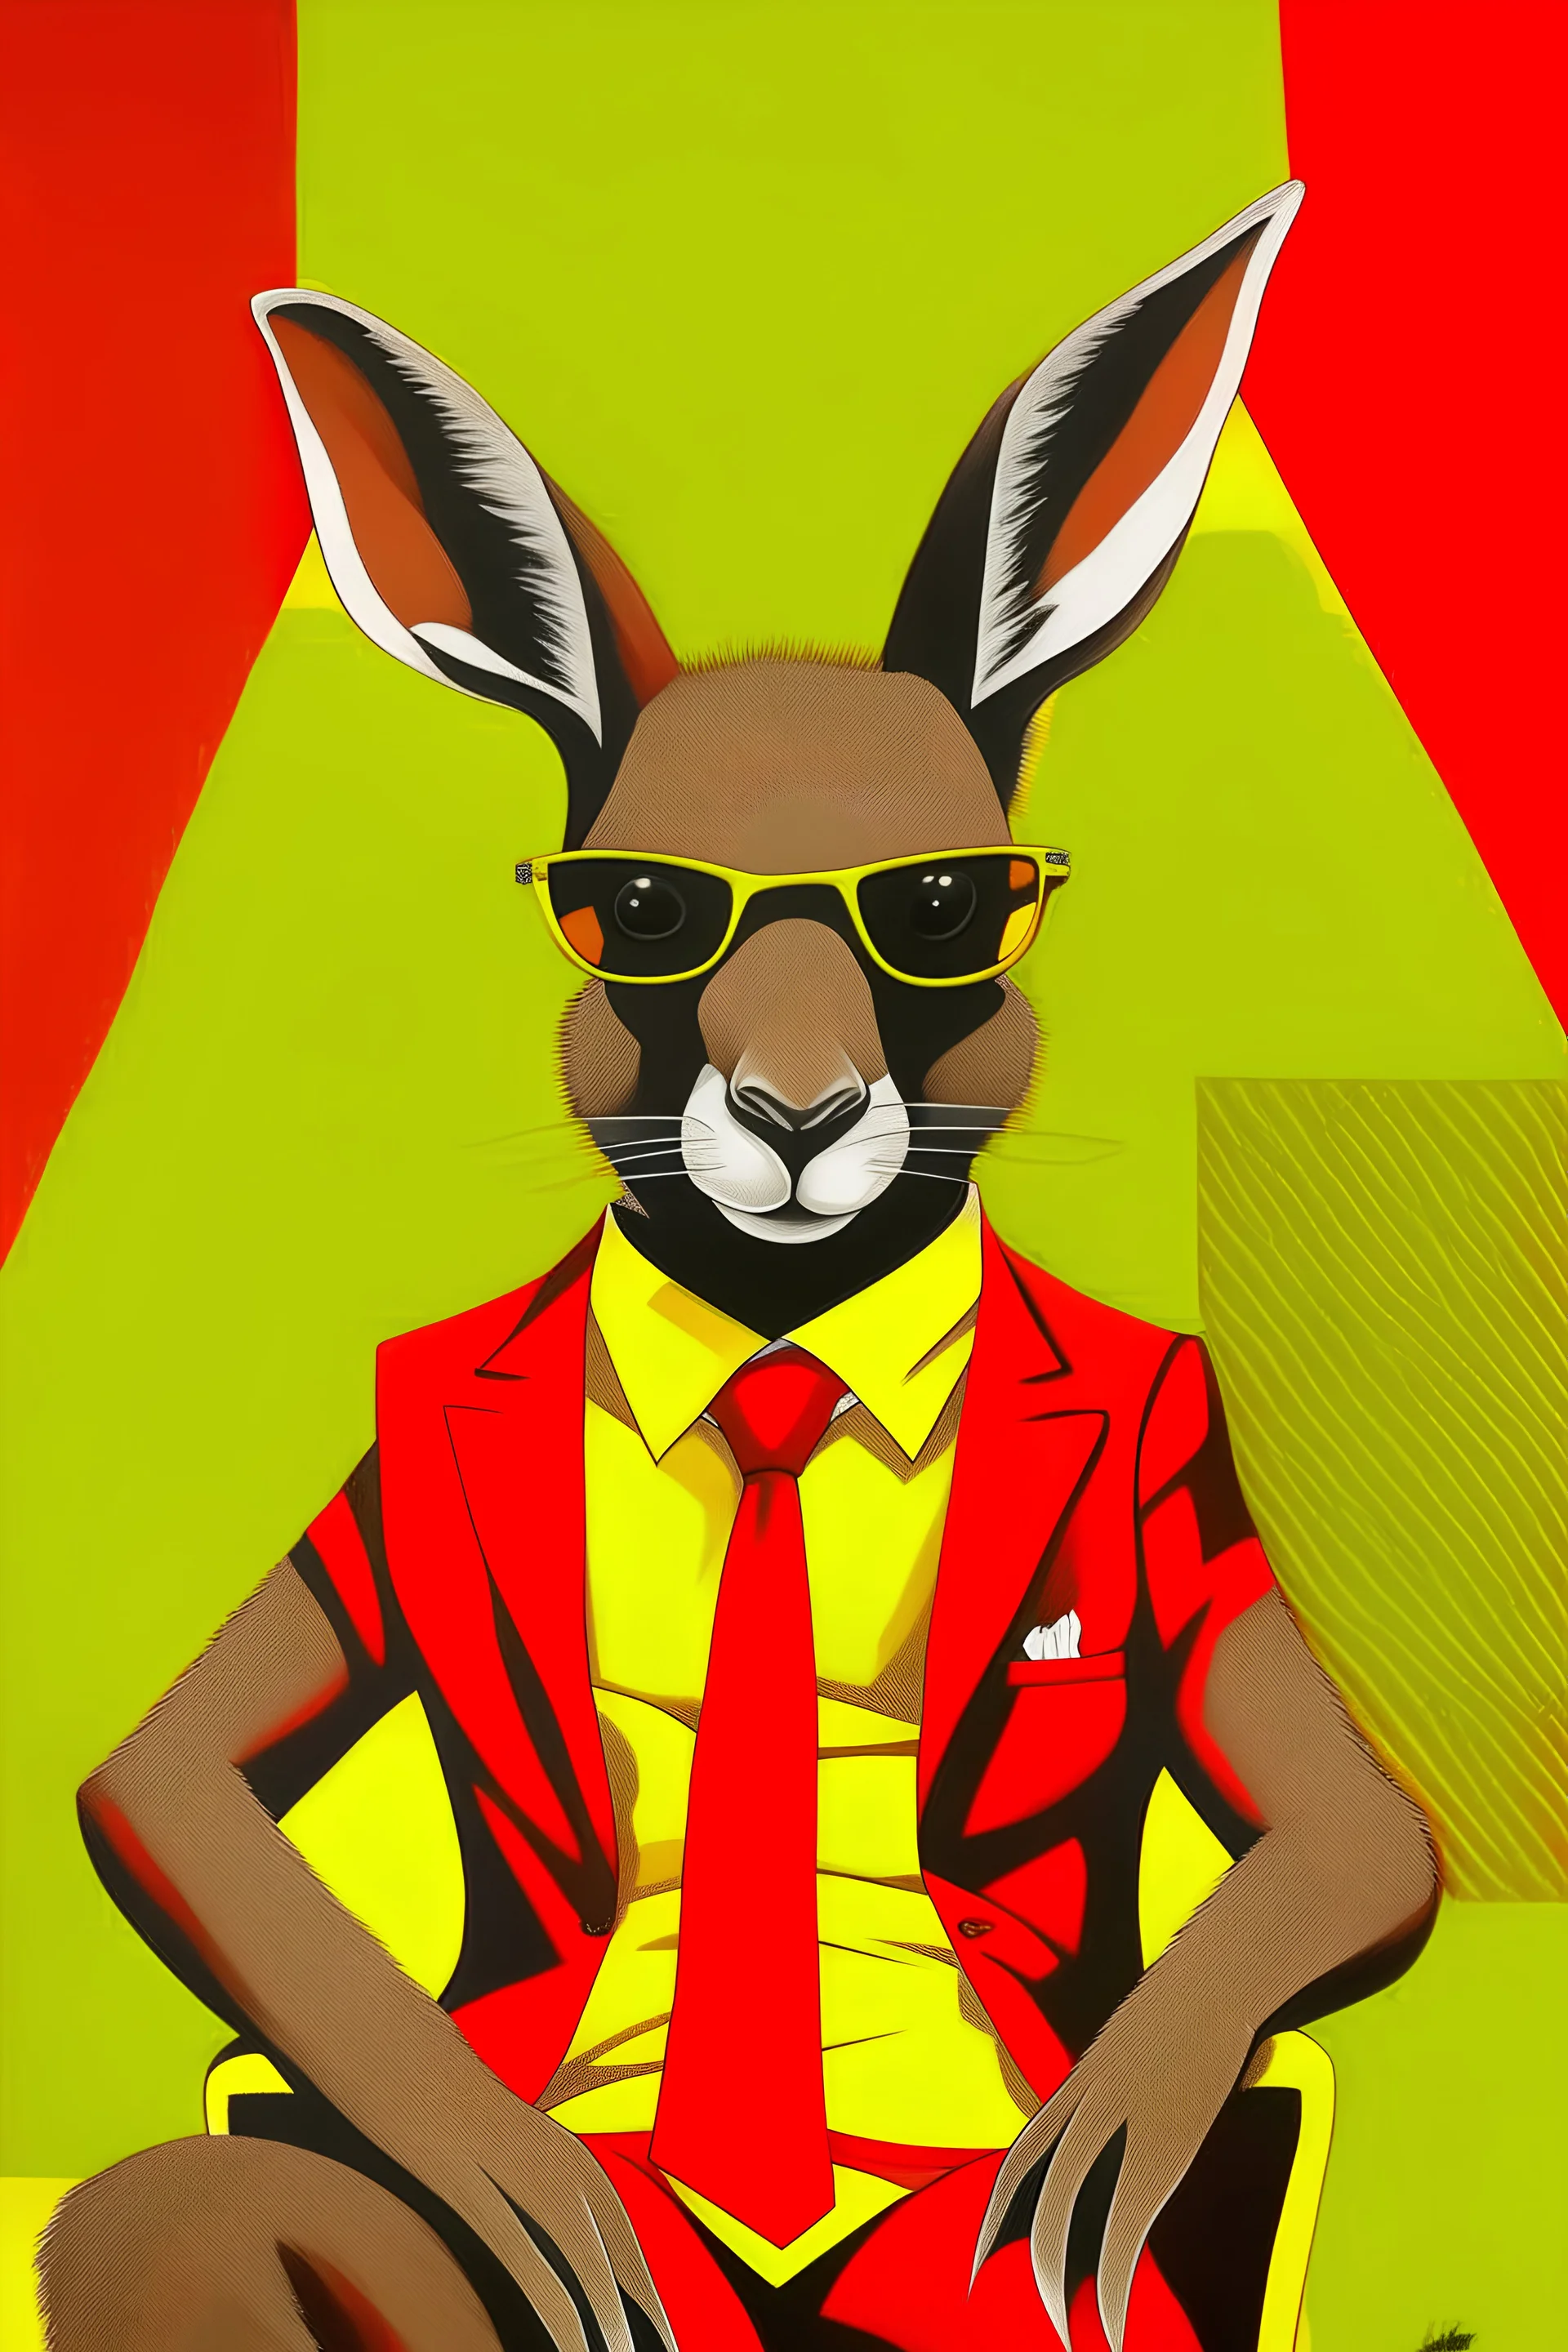 A portrait of brown kangaroo in a yellow background with some crosses and circles in the downside of the background. the kangaroo is sitting in a advance red chair and wear a black suit and black sunglasses. the kangaroo is looking in front of him.